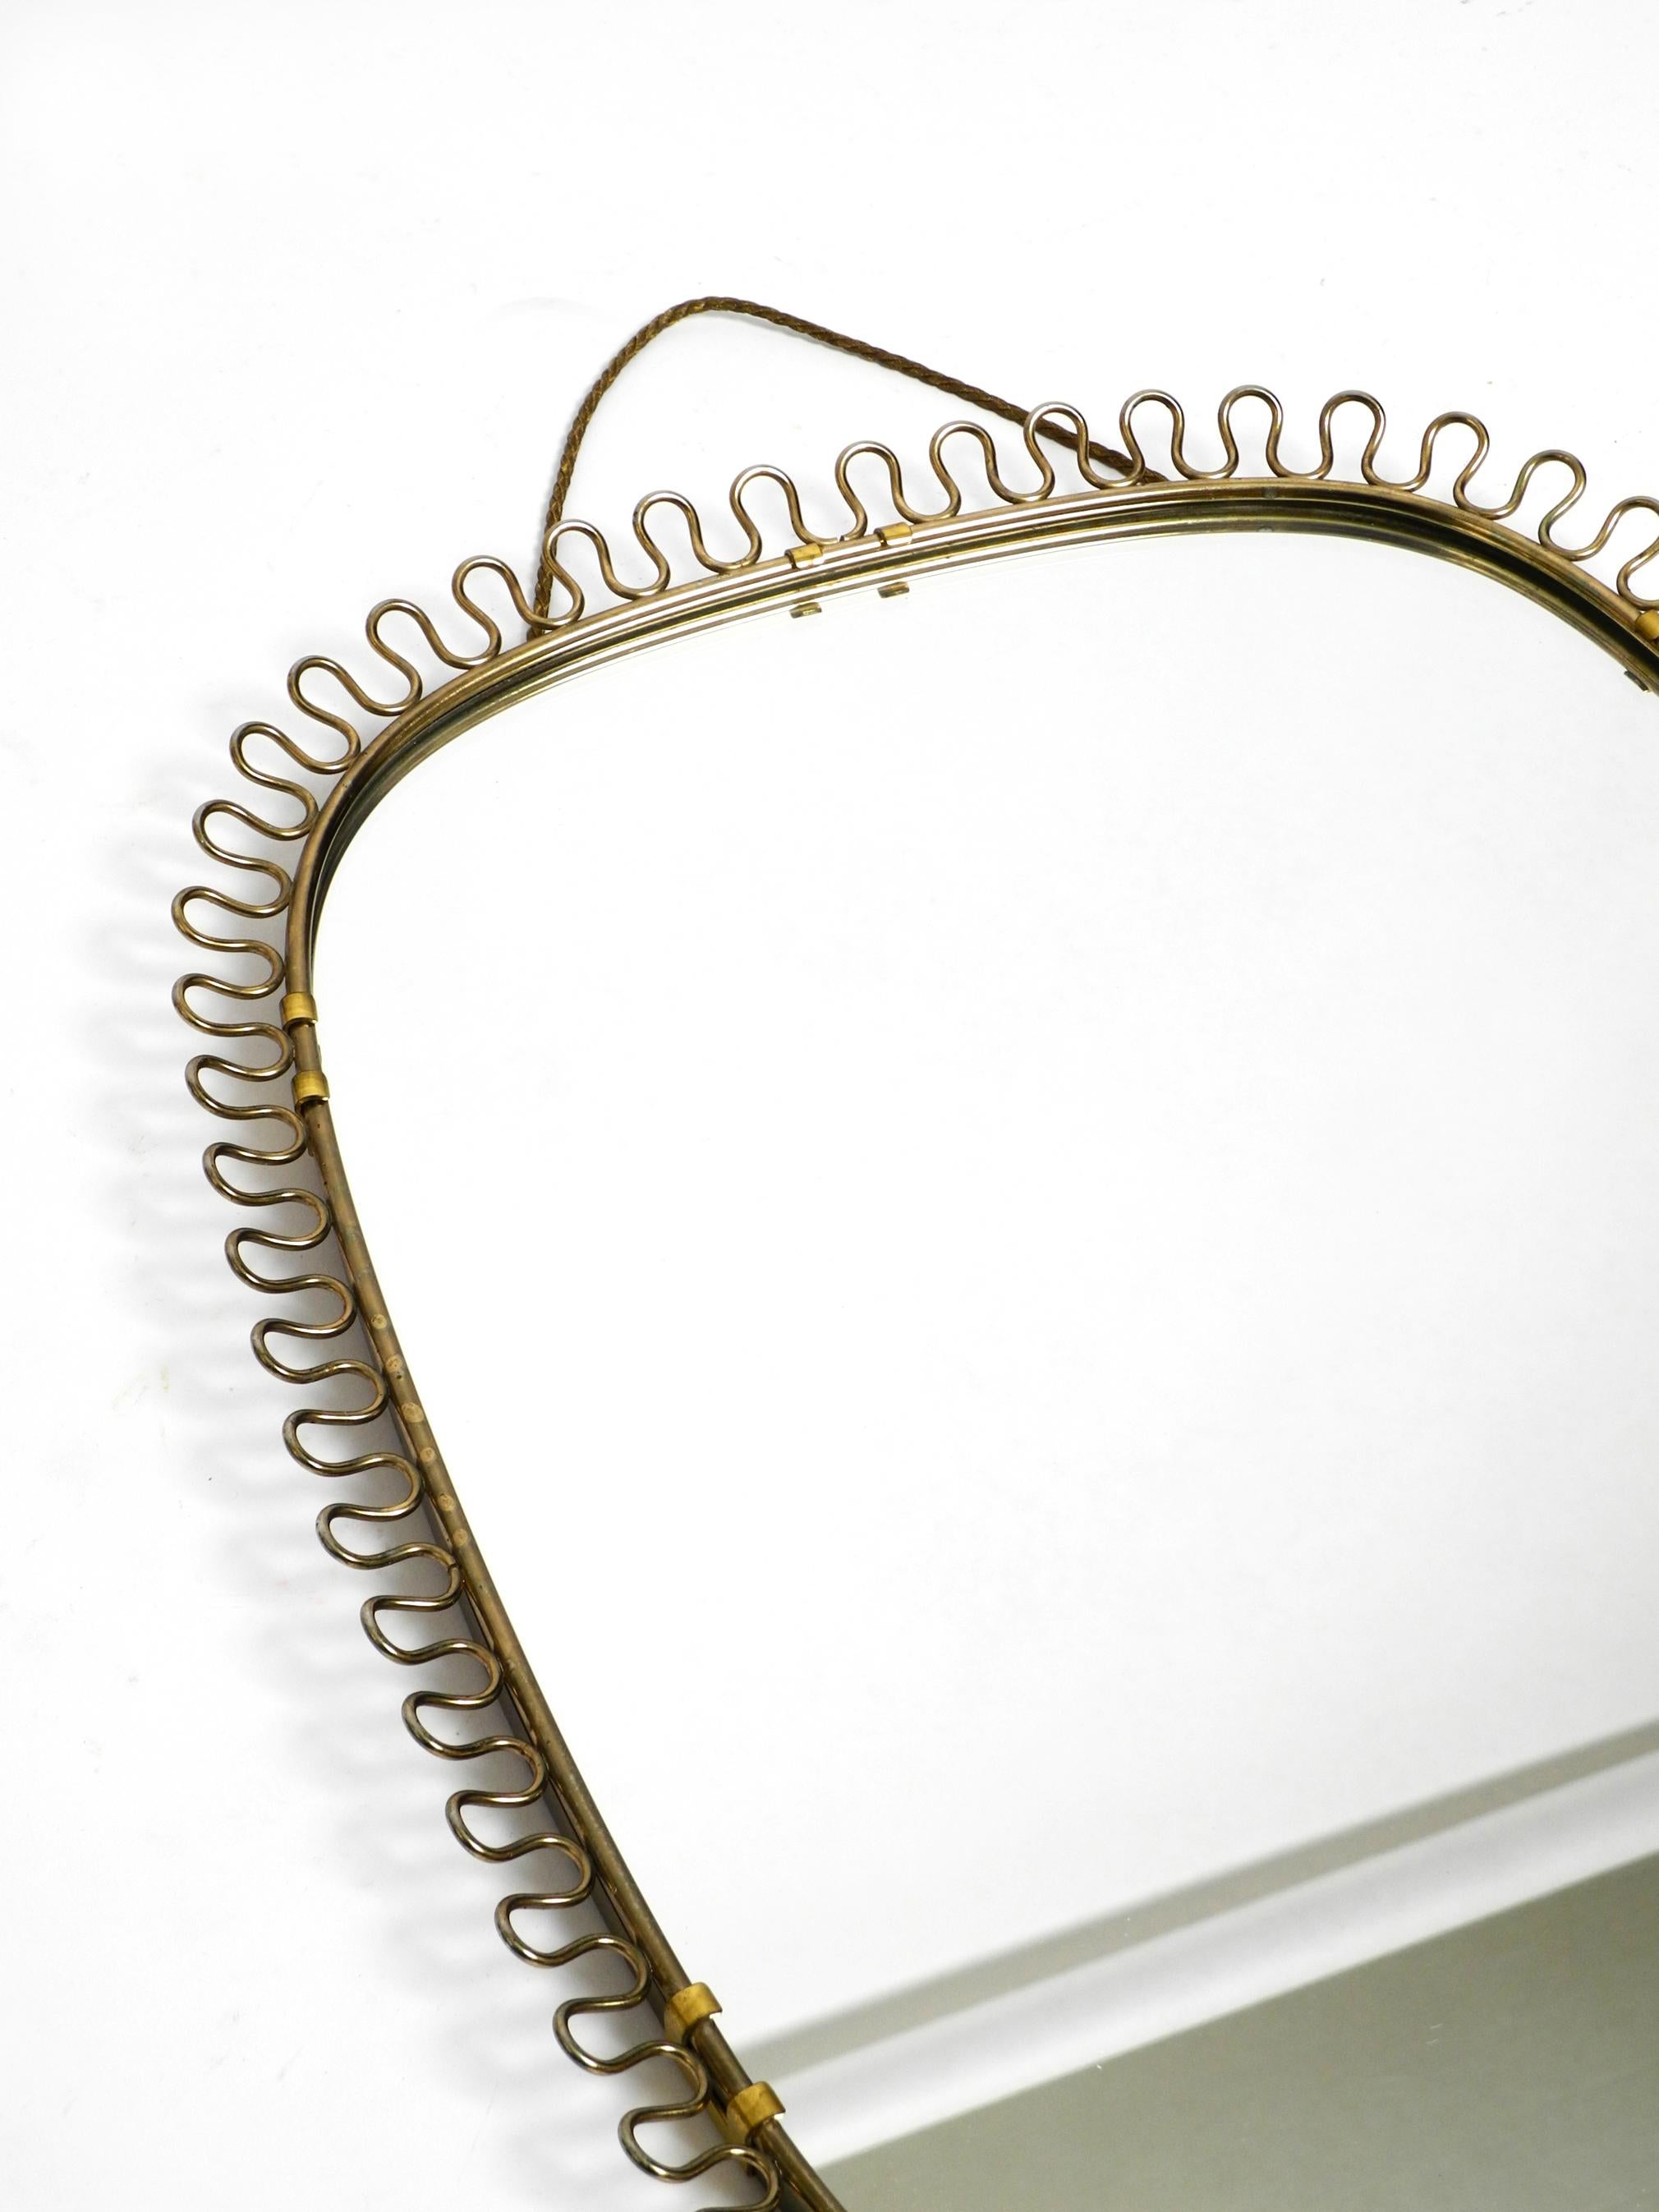 European Small, heavy Mid Century wall mirror with a frame with gold colored metal loops For Sale